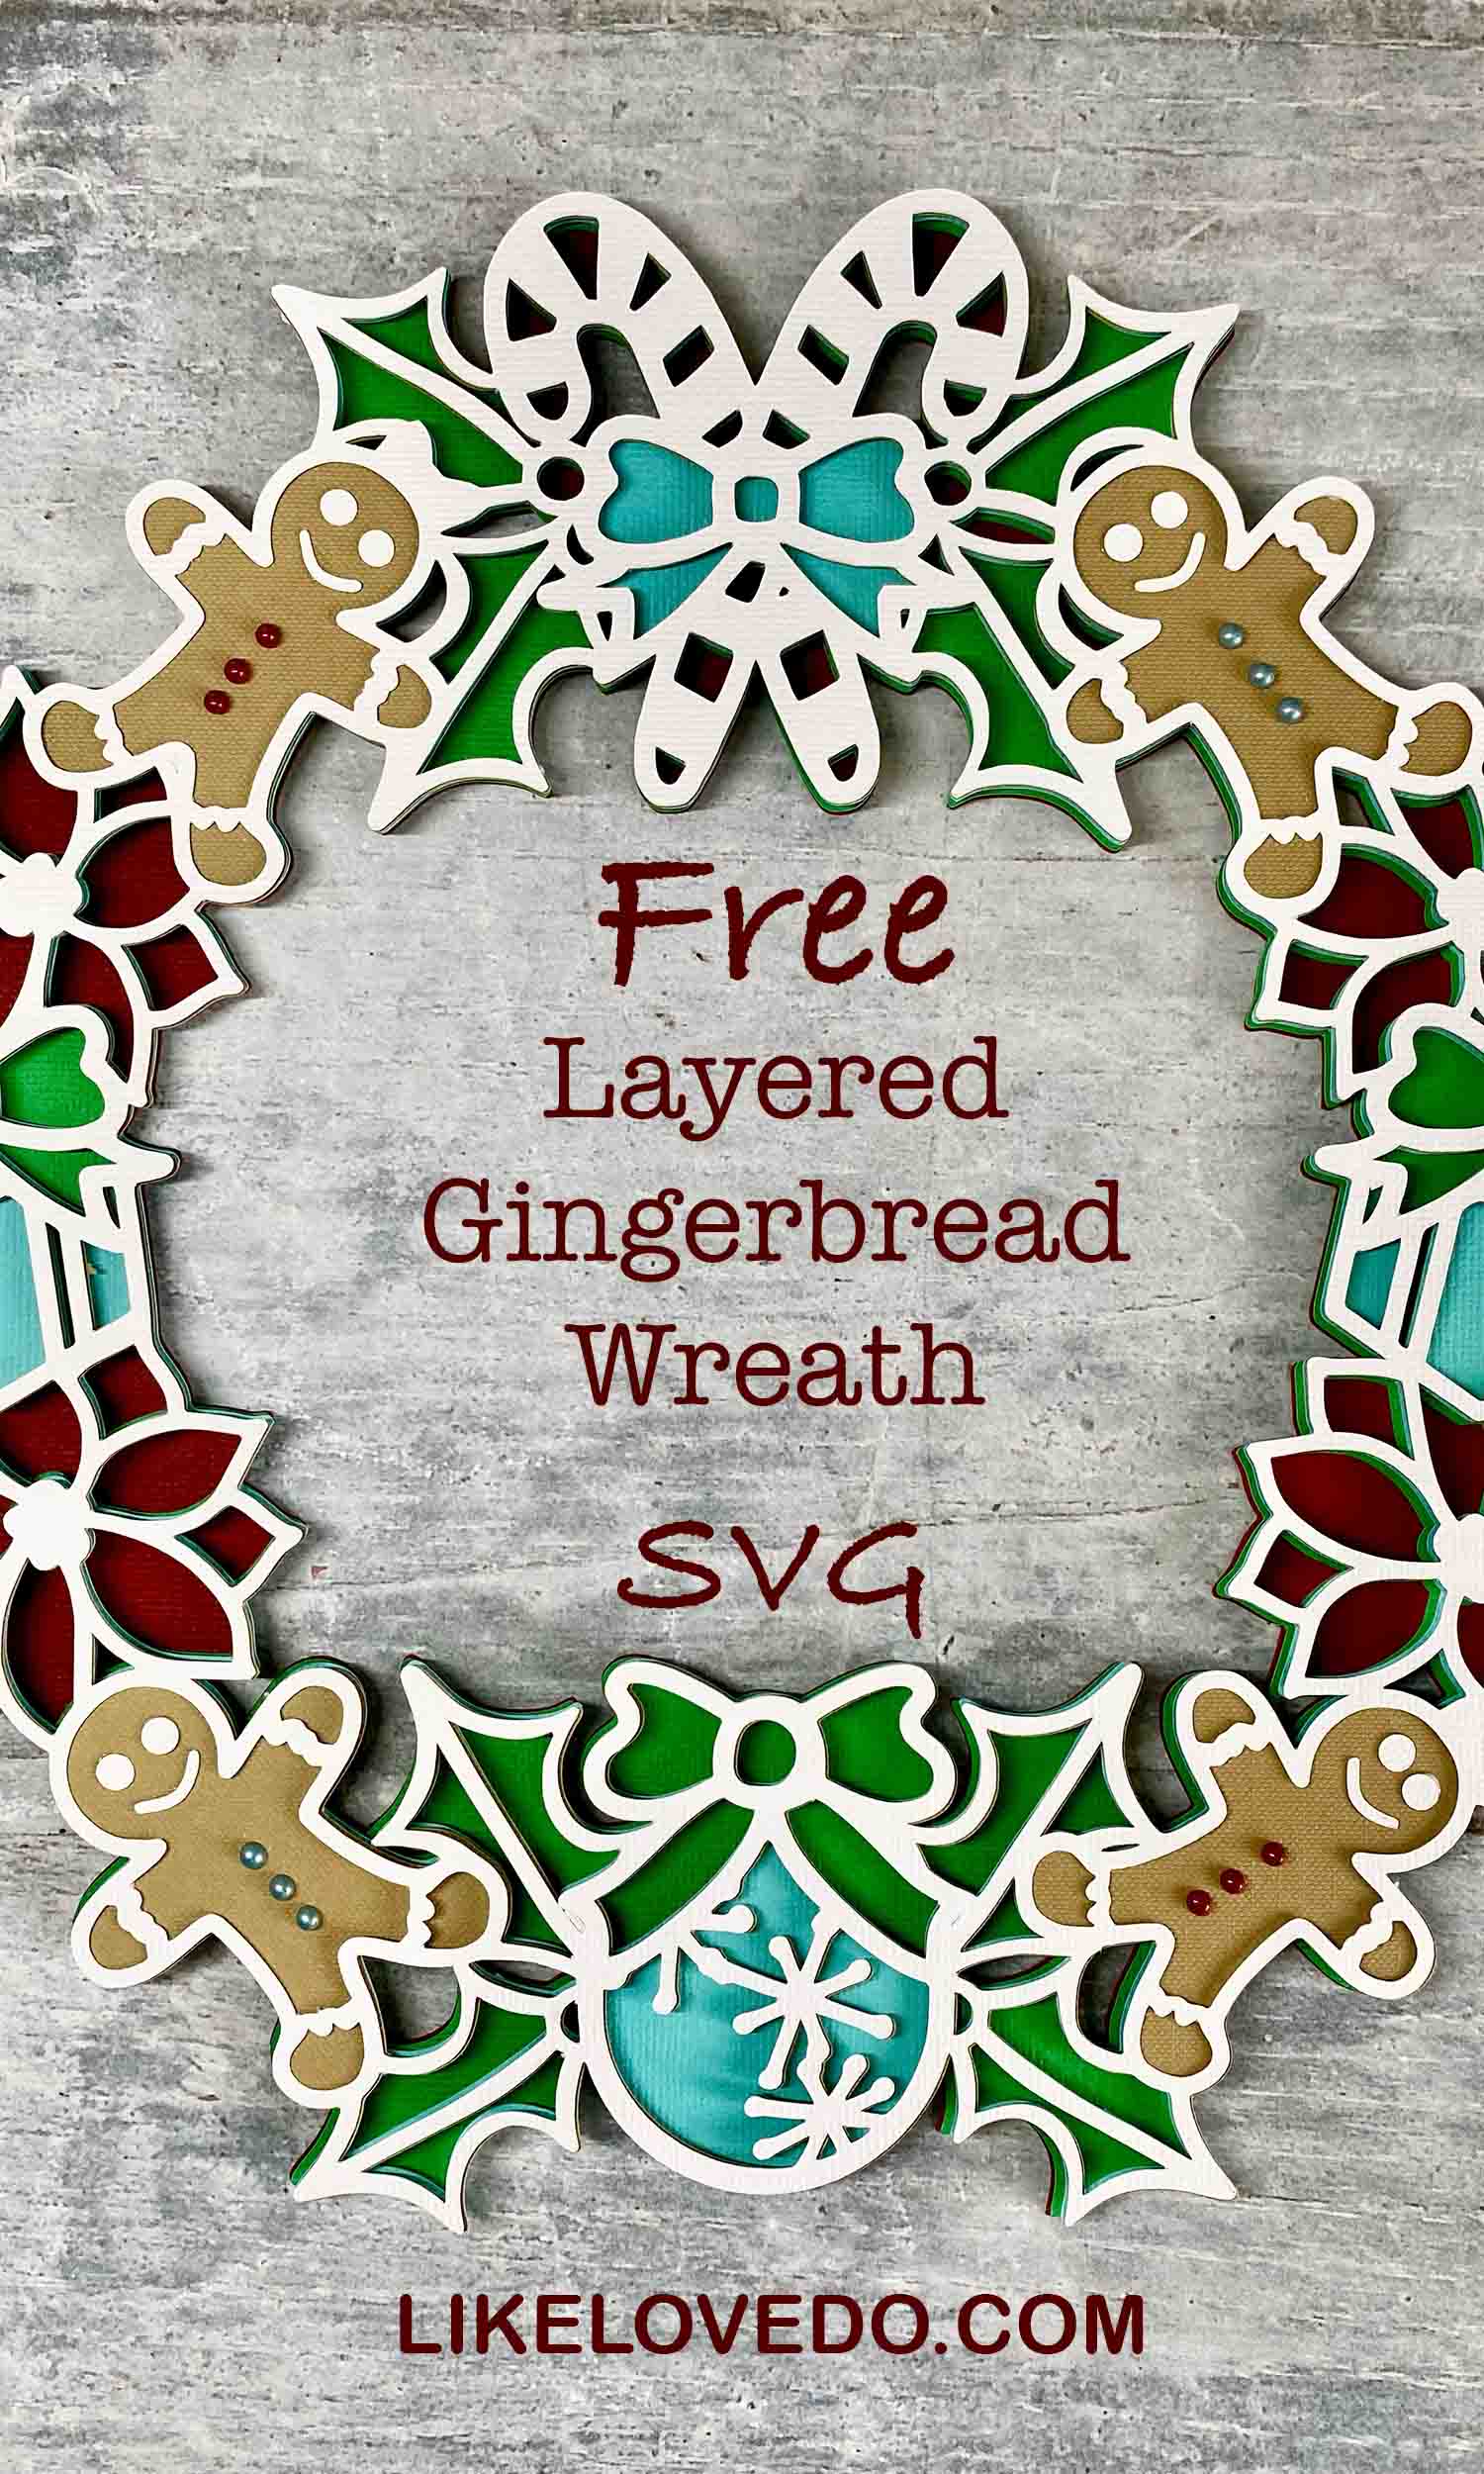 Layered Gingerbread Wreath SVG